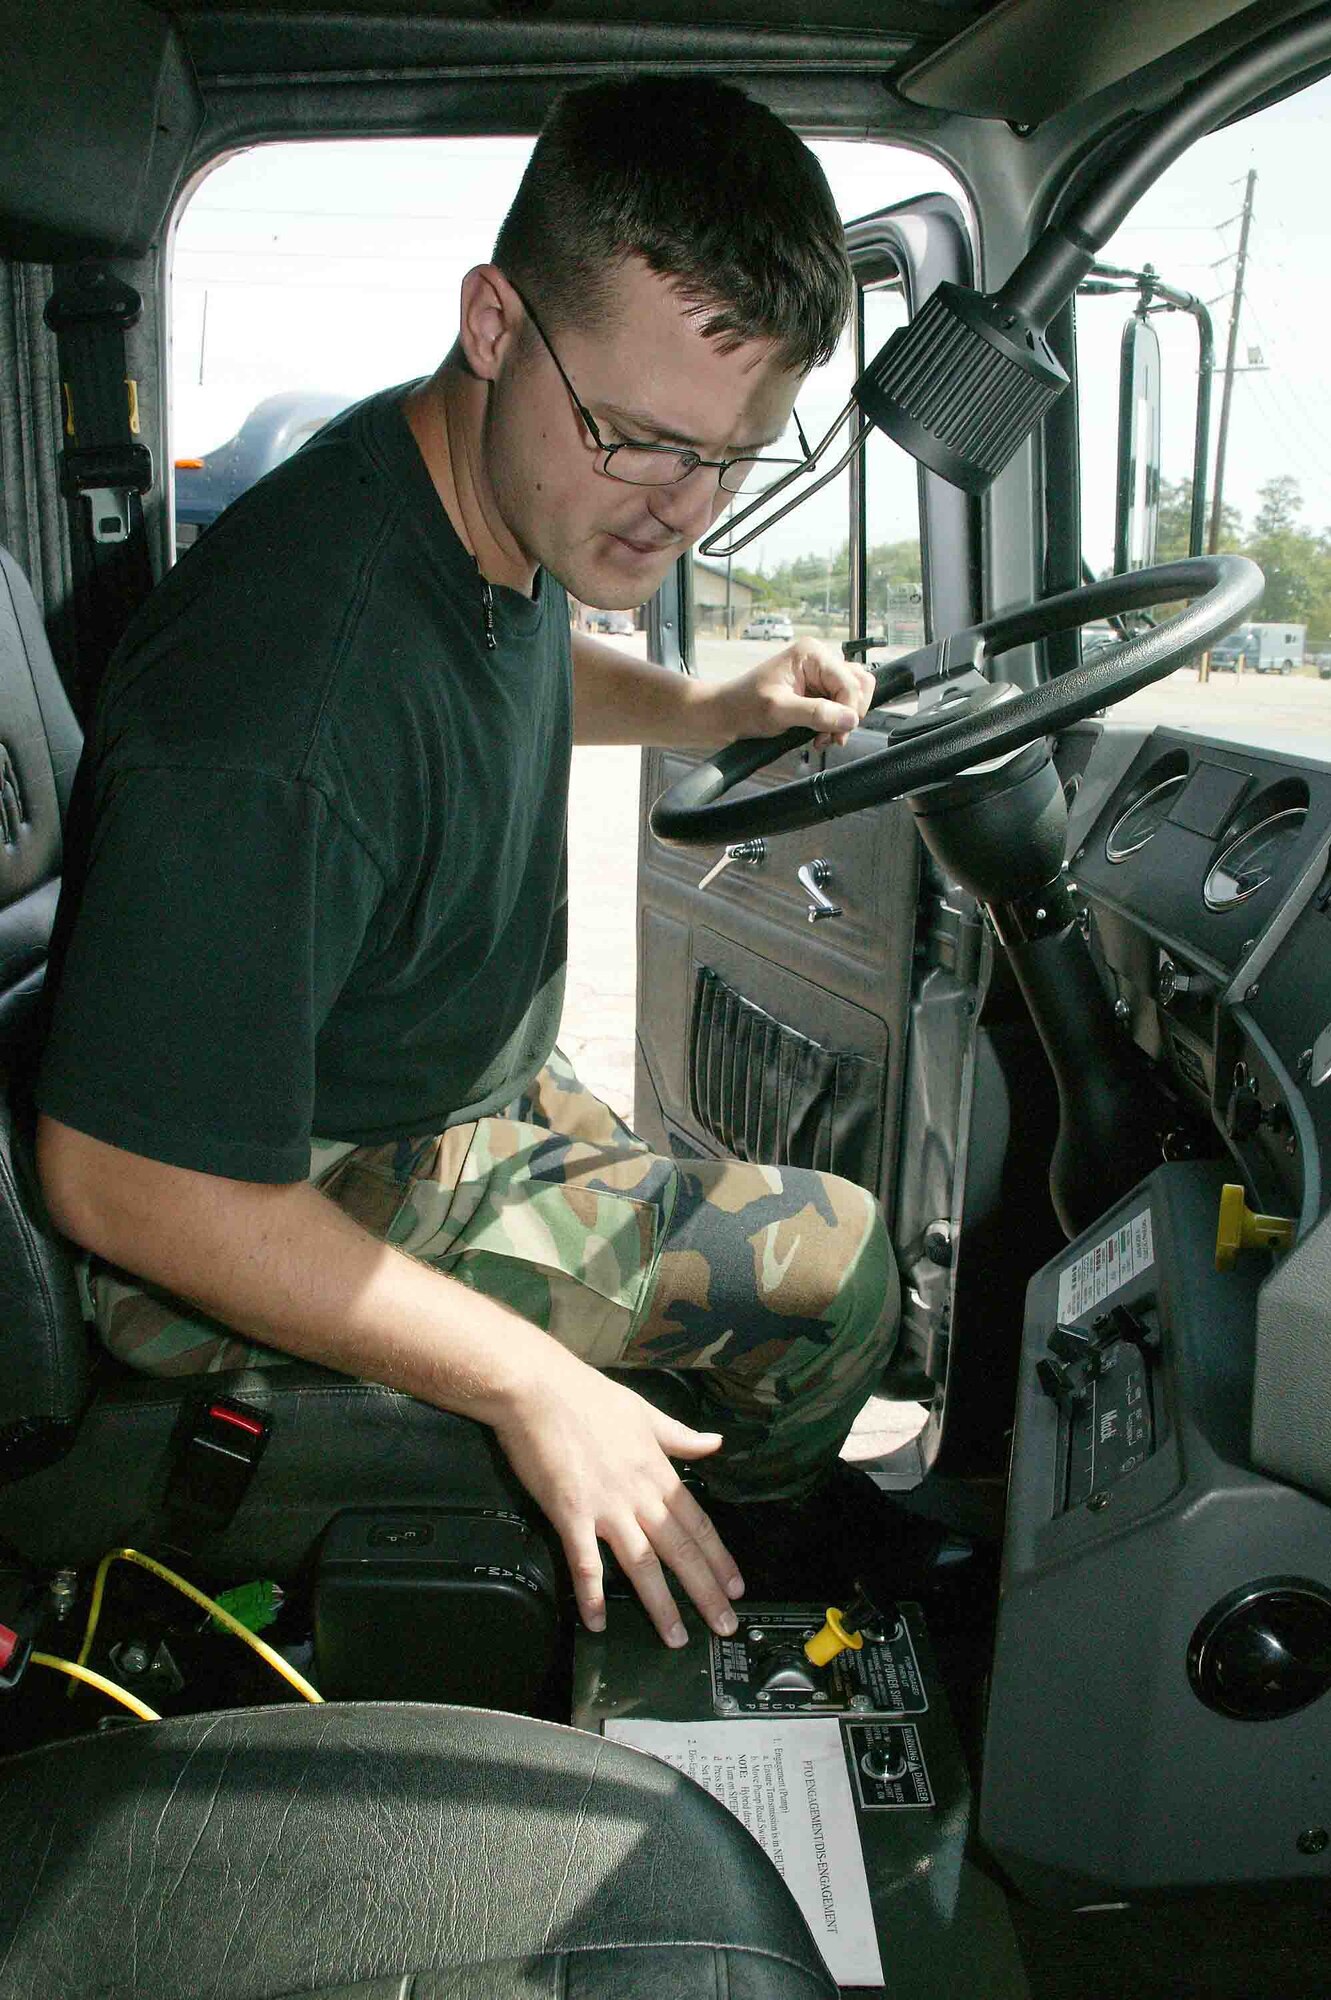 SHAW AIR FORCE BASE, S.C. -- Staff Sgt. Stephen Zuelke, 20th Logistics Readiness Squadron vehicle technician, inspects the interior electrical equipment of an R-11 hybrid refueling truck April 25. The environmentally friendly hybrid is the only one of its kind in the Air Force. The 72,000-pound hybrid is undergoing a one-year test at Shaw to see how much money it saves on fuel, maintenance and other cost measurements. (U.S. Air Force photo/Senior Airman John Gordinier)